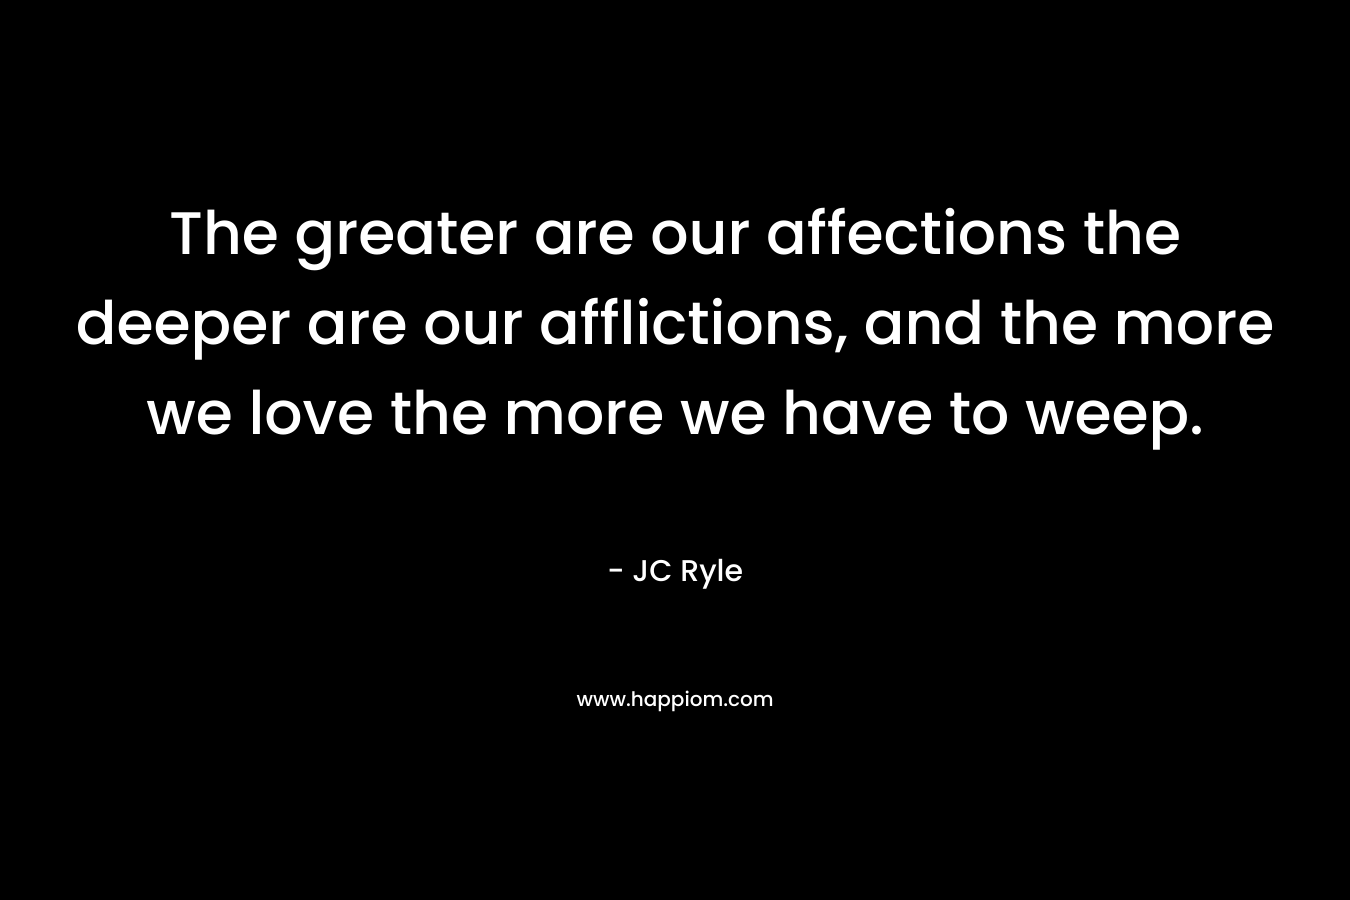 The greater are our affections the deeper are our afflictions, and the more we love the more we have to weep.